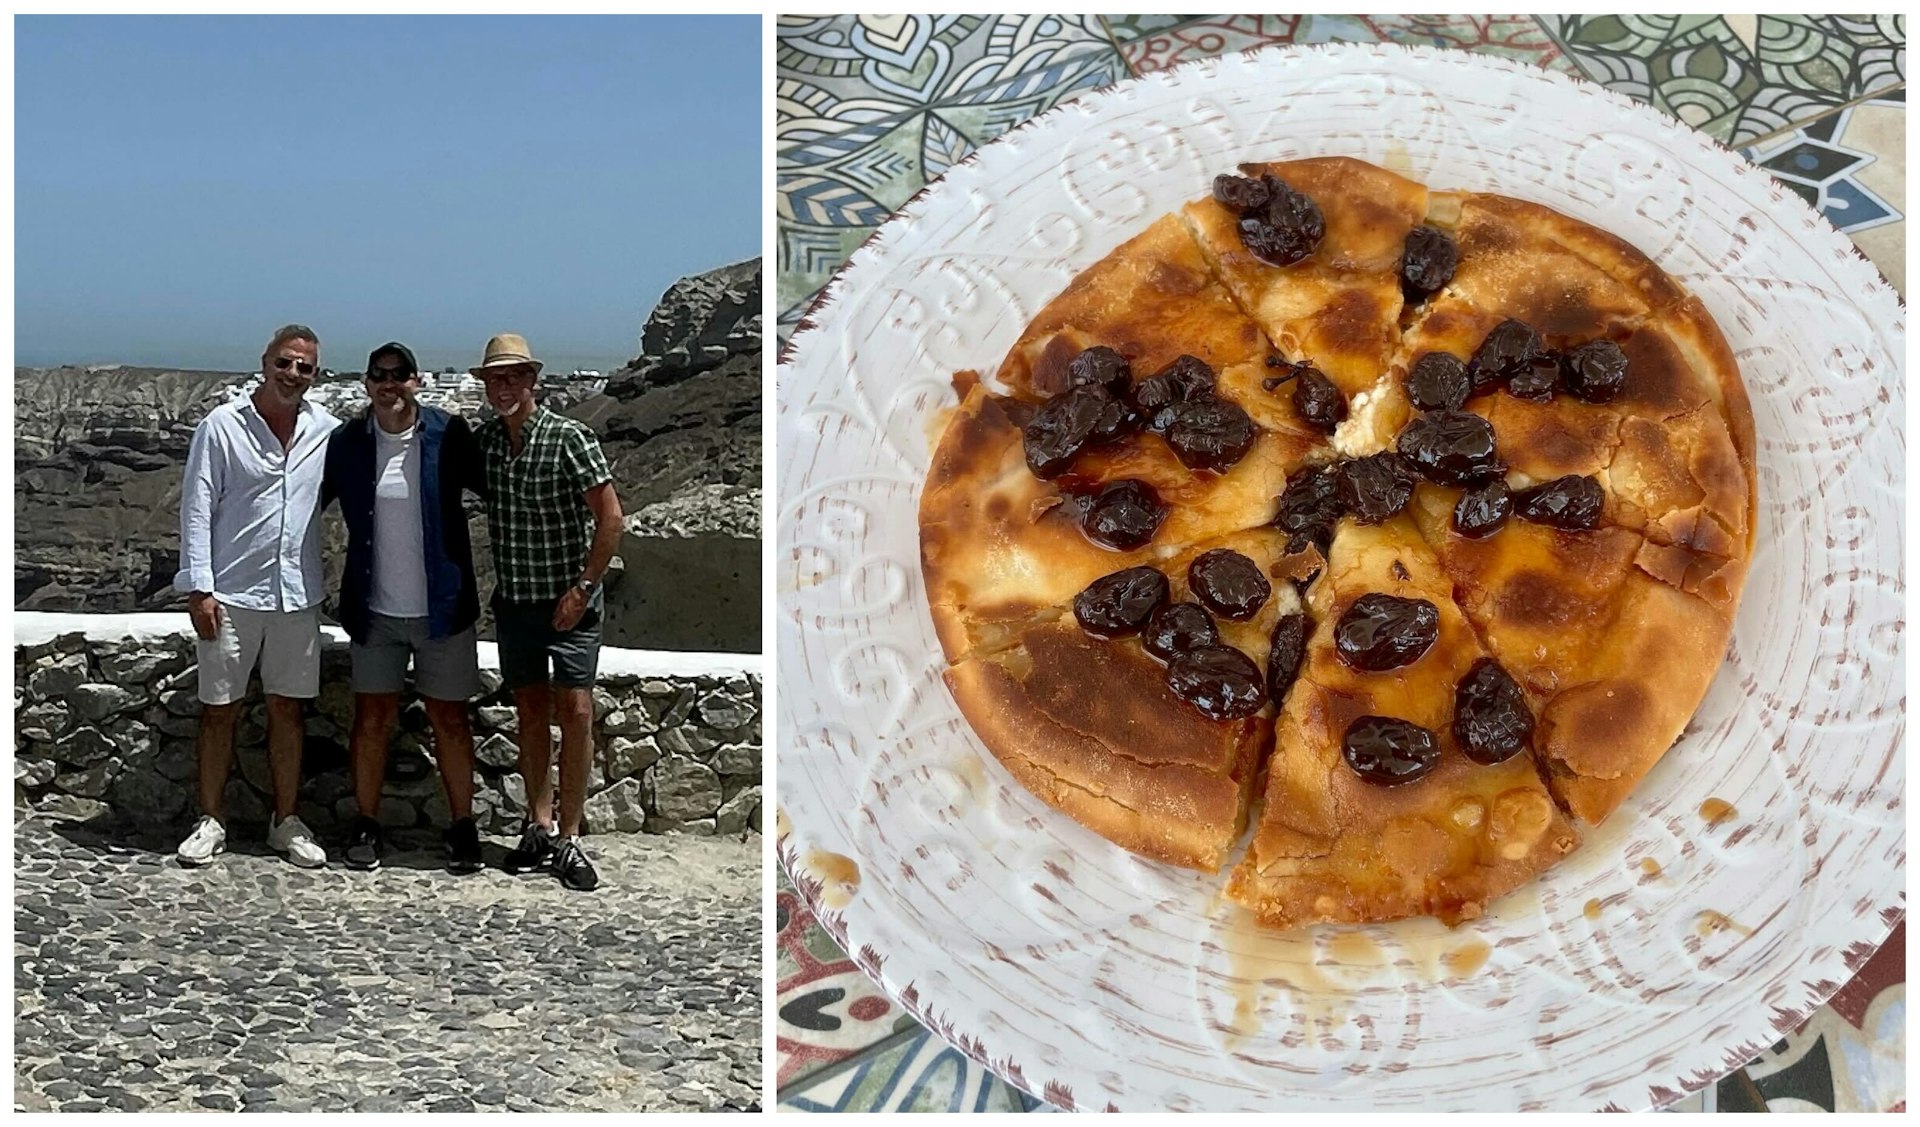 Chris posing with friends in Santorini and showcasing local cuisine